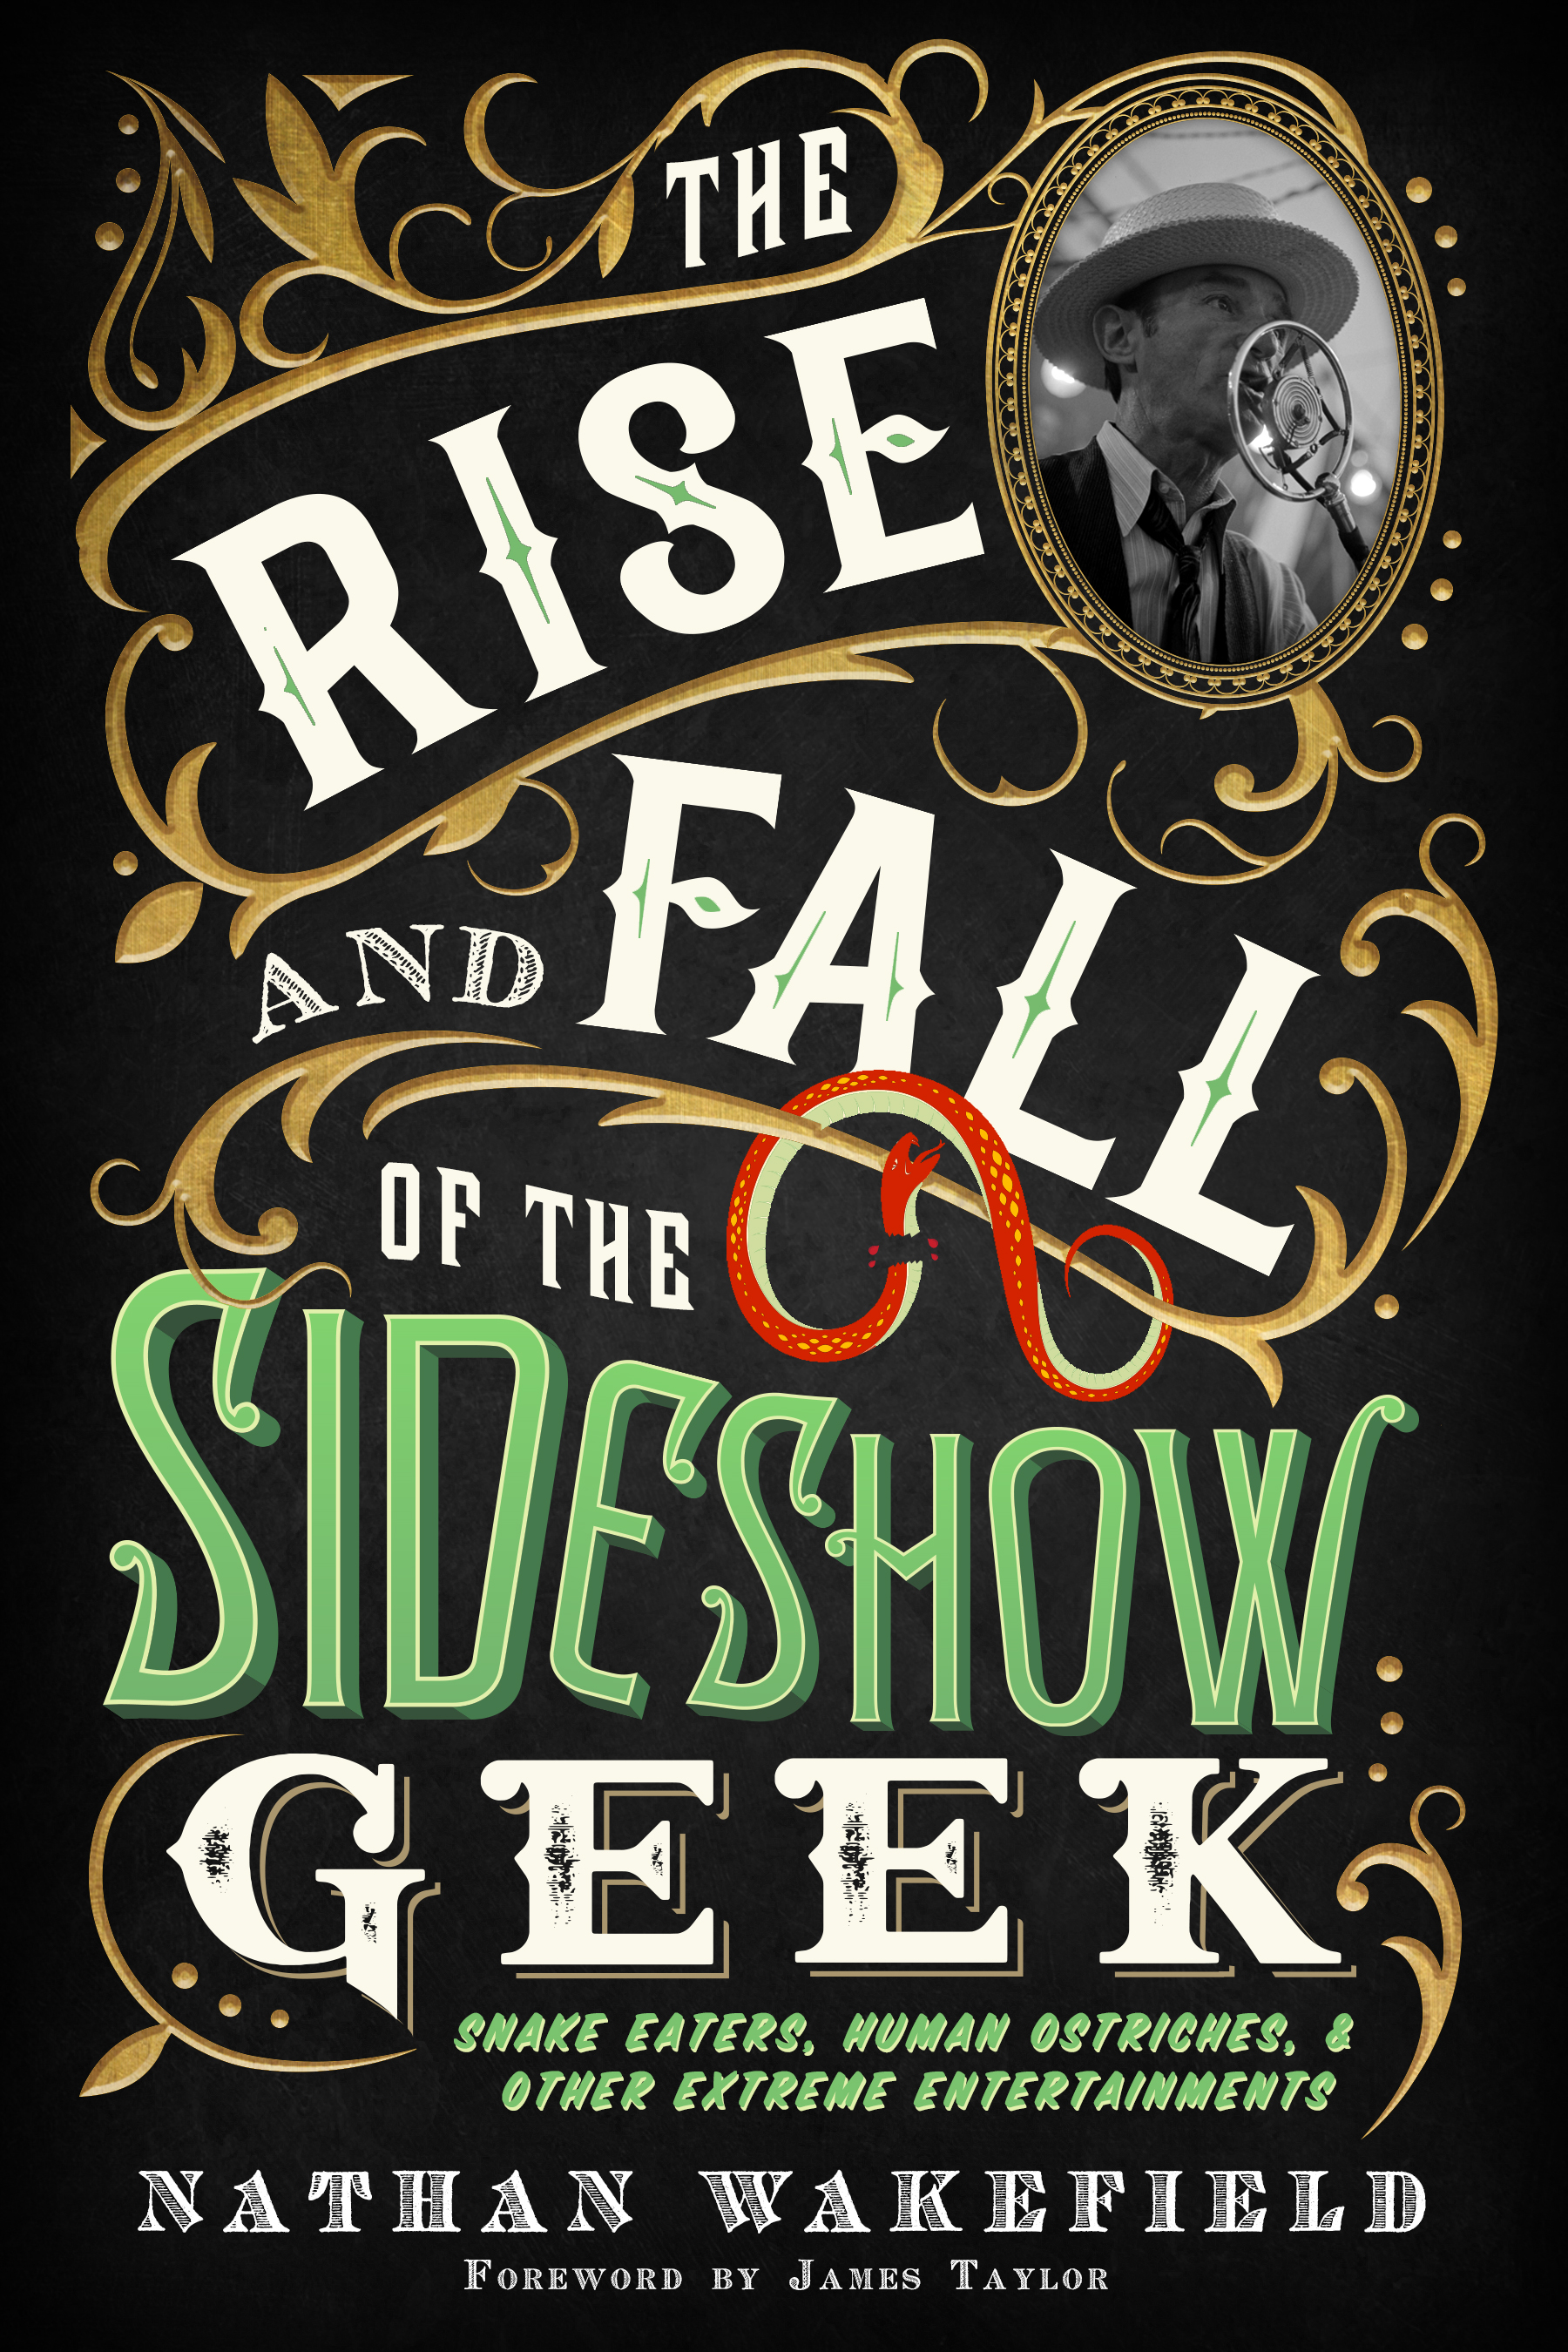 Vaudevisuals Press is Proud to Present Their New Imprint, Outside Talker Press. OTP is Excited for "The Rise and Fall of the Sideshow Geek."